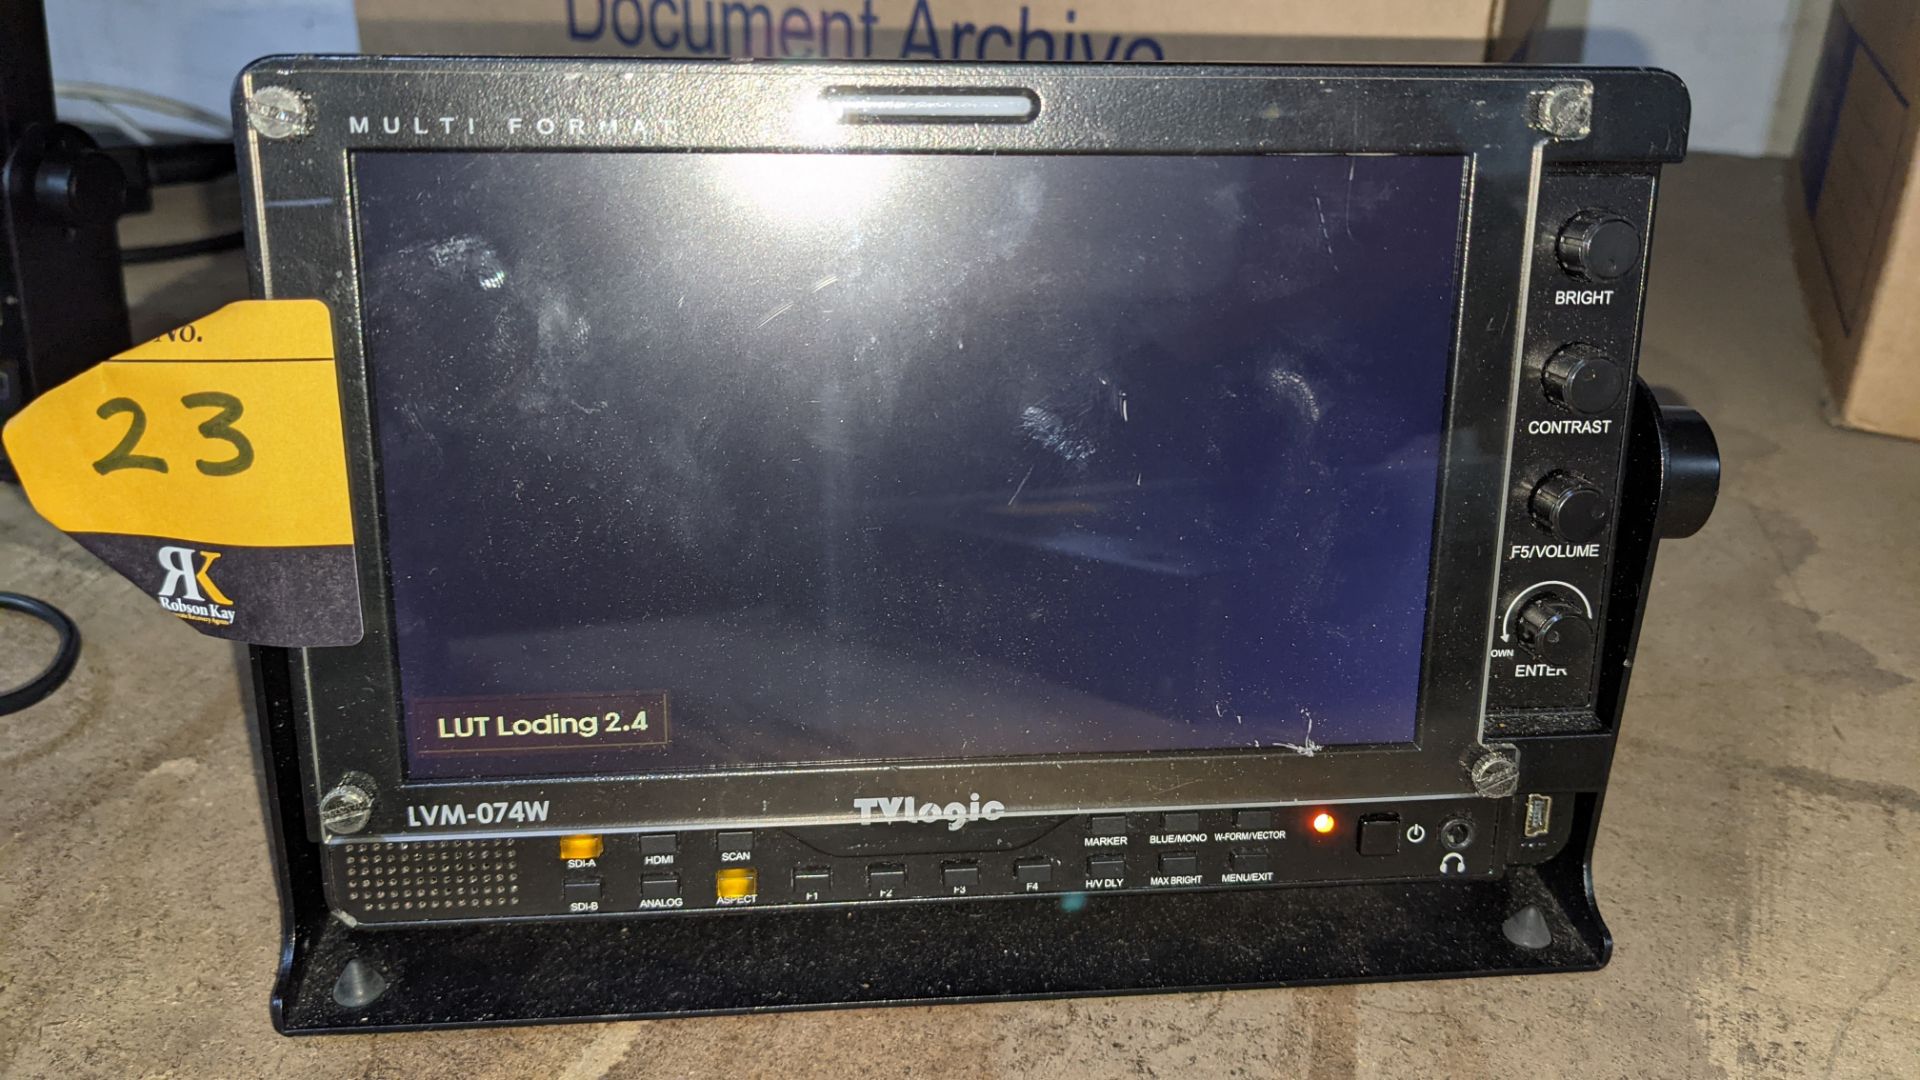 TVLogic multi format LCD monitor model LVM-074W, including hinged bracket - NB No power supply - Image 5 of 11